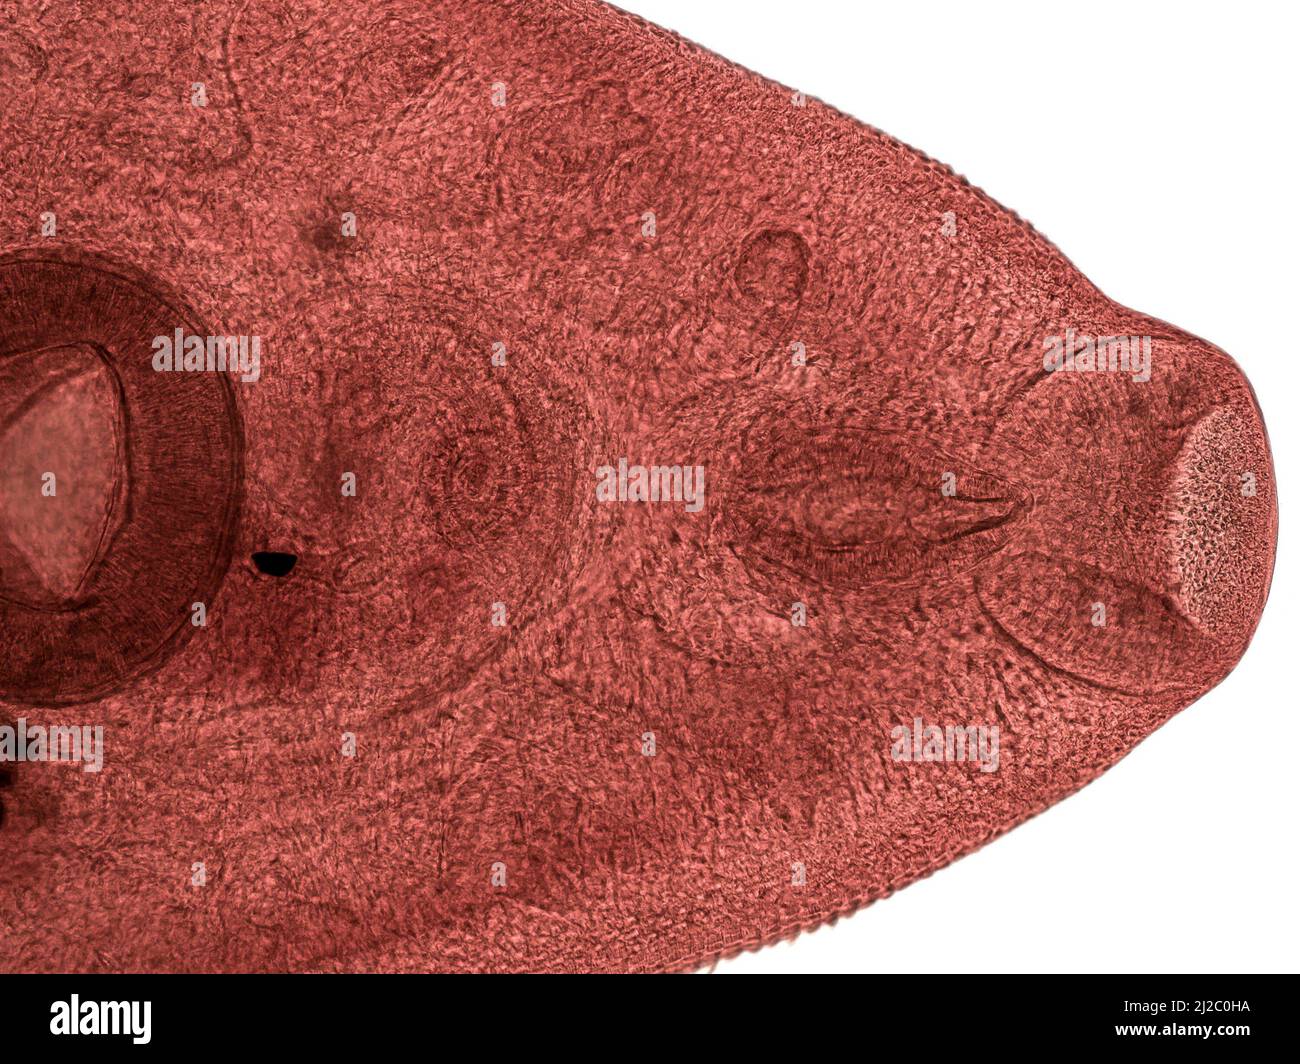 Parasitic flatworms in humans. Liver fluke (Fasciola hepatica) adult stage in light microscope. Stock Photo